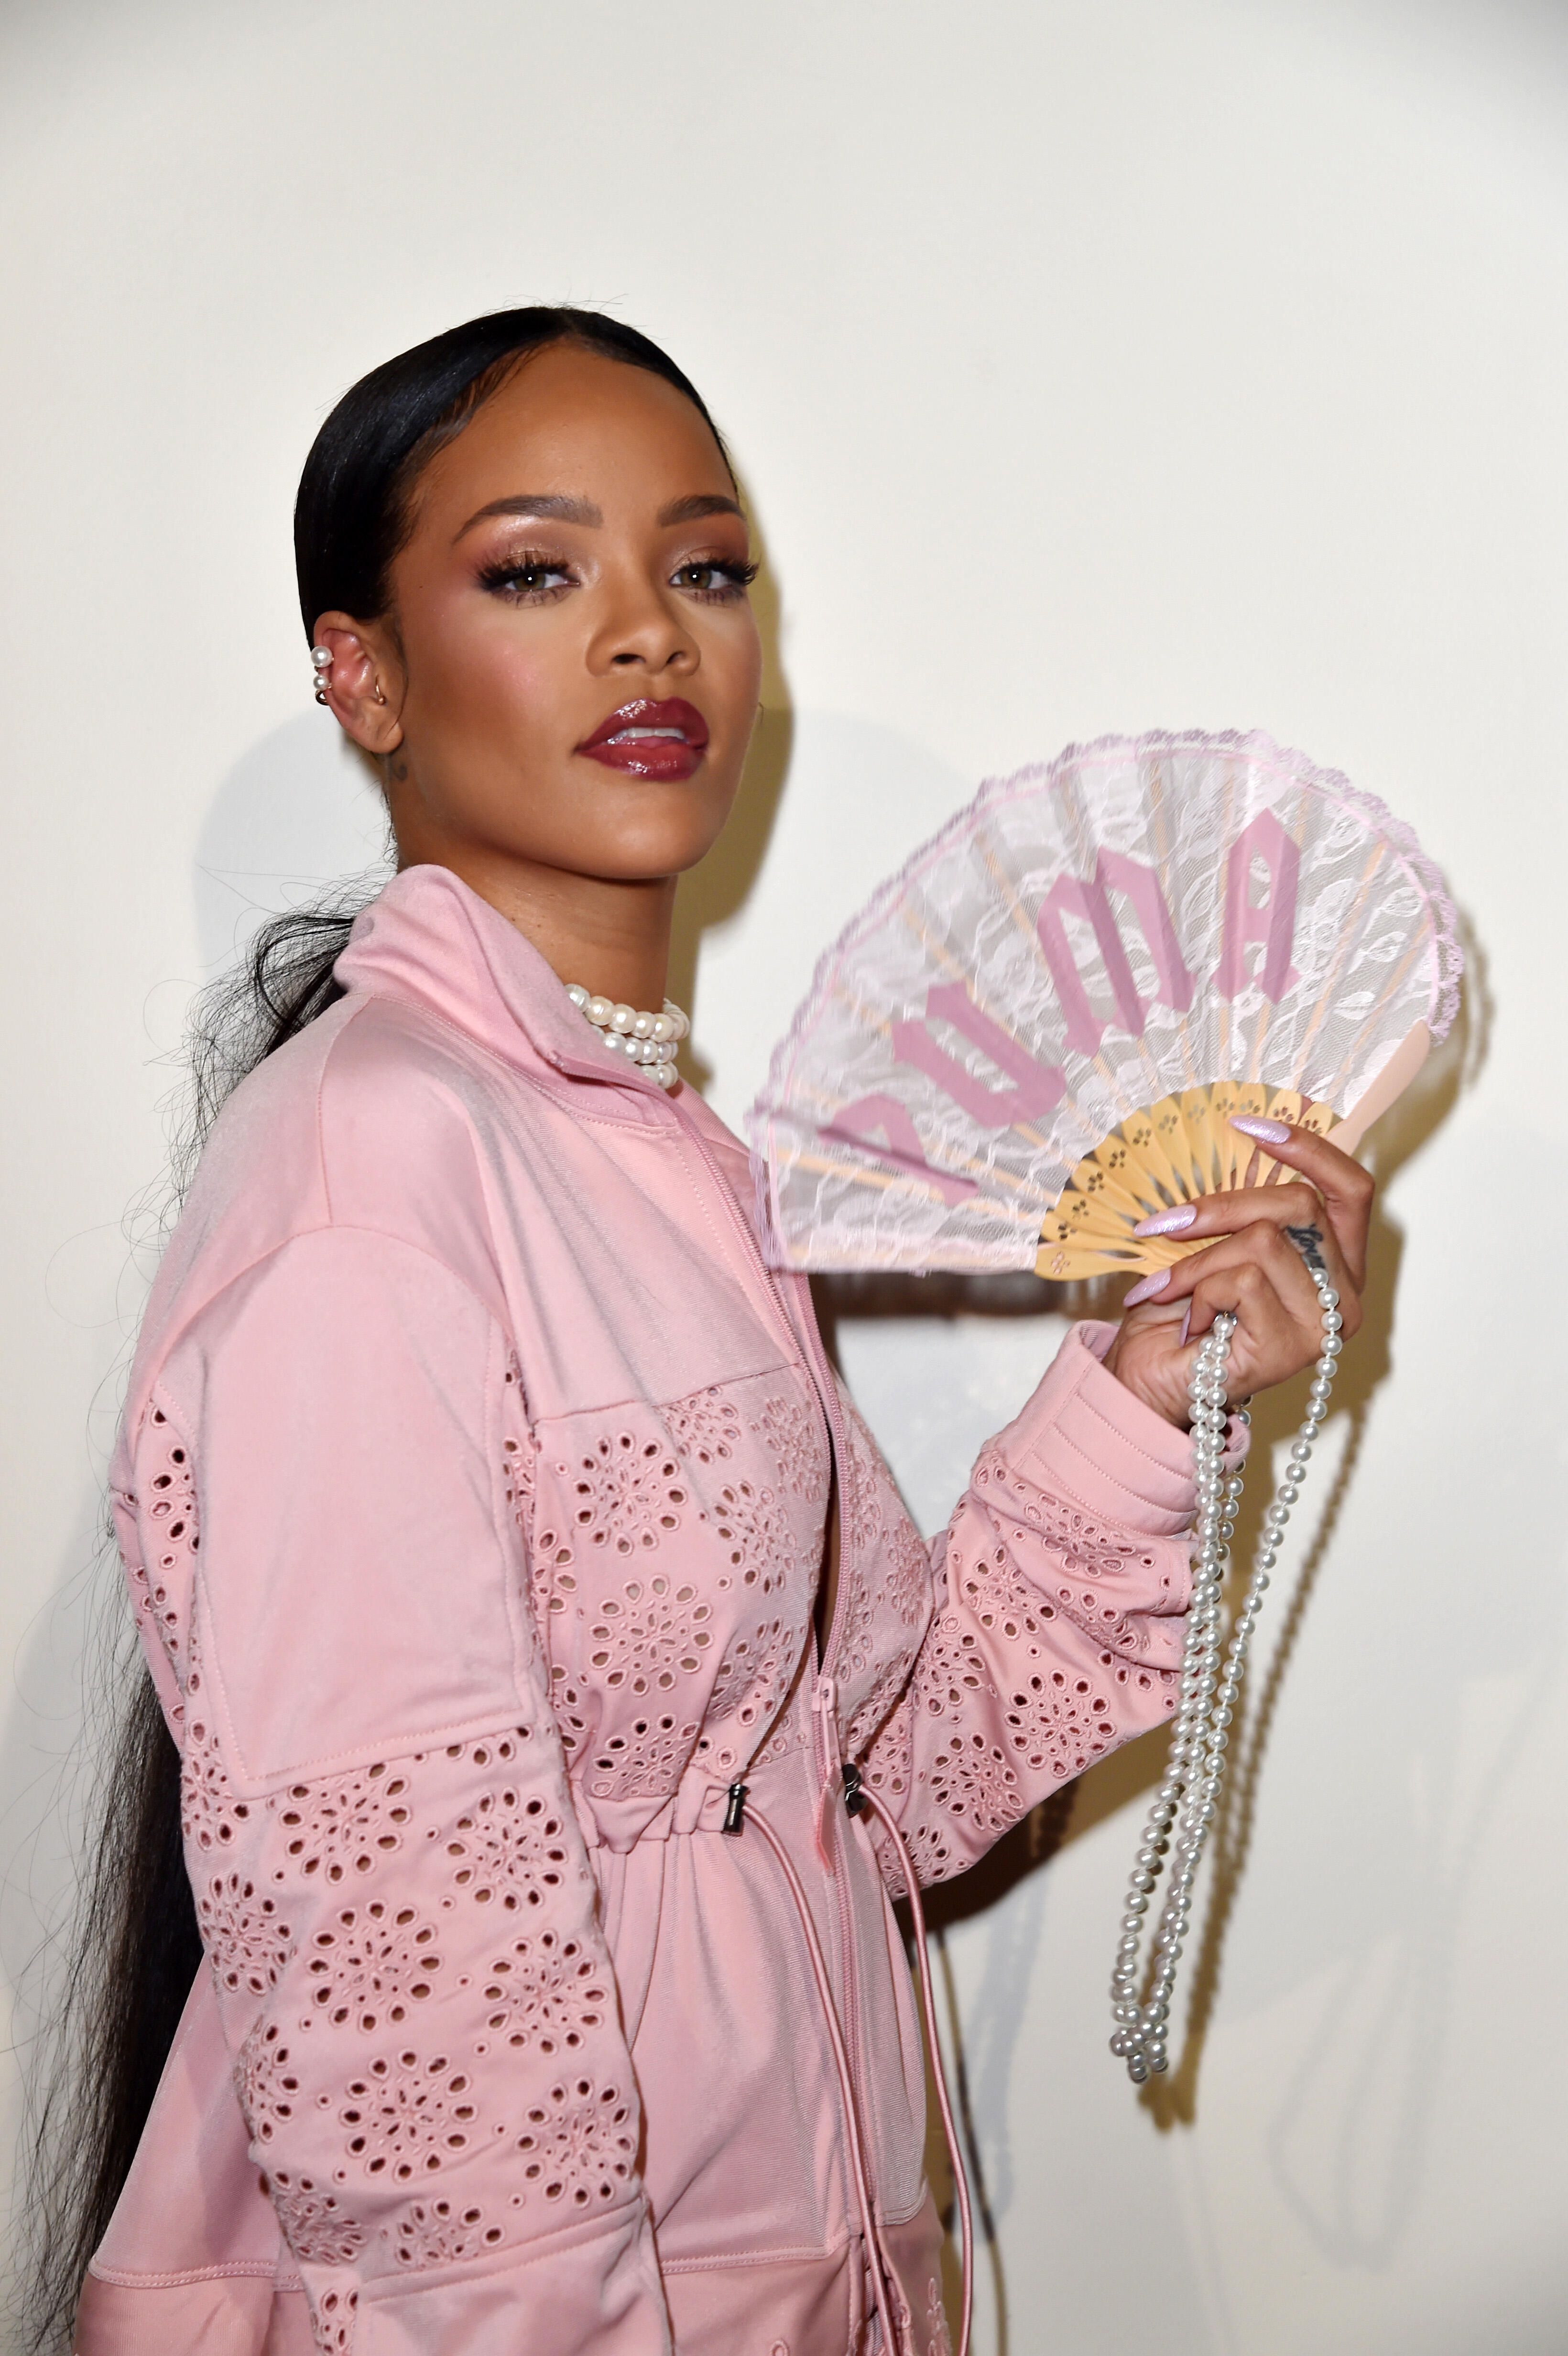 PARIS, FRANCE - SEPTEMBER 28:  Rihanna is seen backstage during FENTY x PUMA by Rihanna at Hotel Salomon de Rothschild on September 28, 2016 in Paris, France.  (Photo by Pascal Le Segretain/Getty Images for Fenty x Puma)